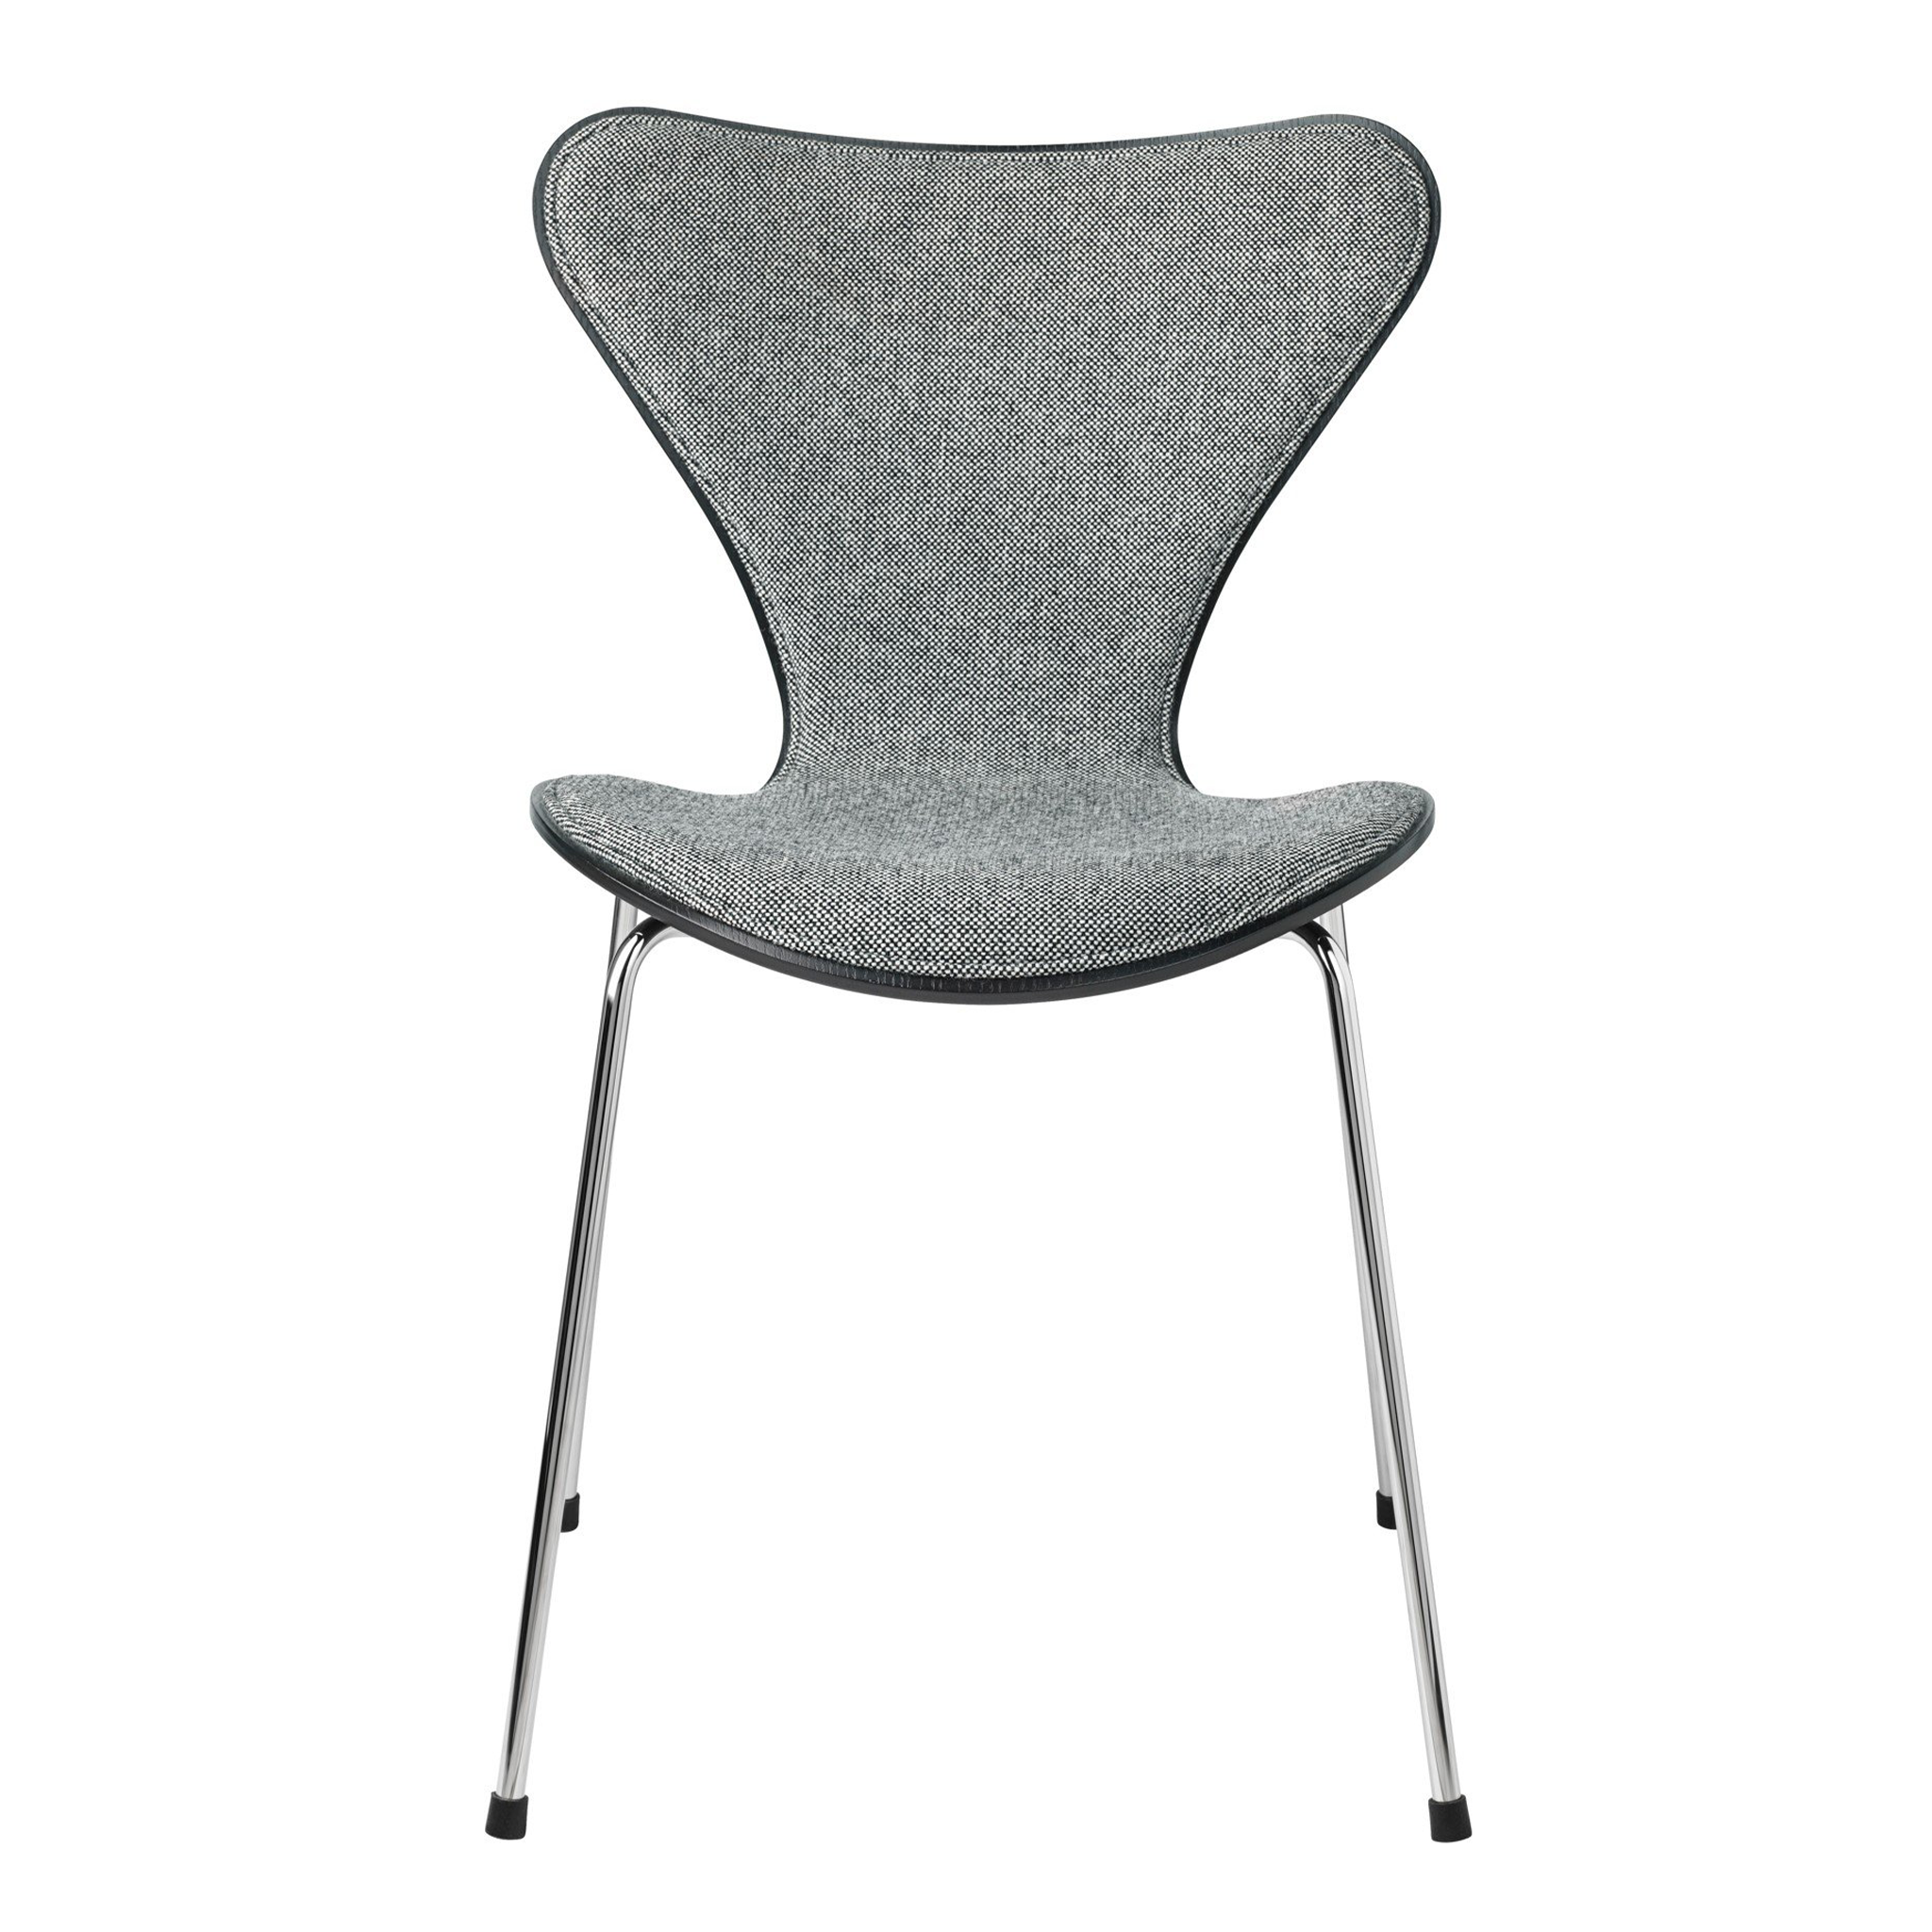 Series 7 Front Upholstered Chair Fabric by Fritz Hansen